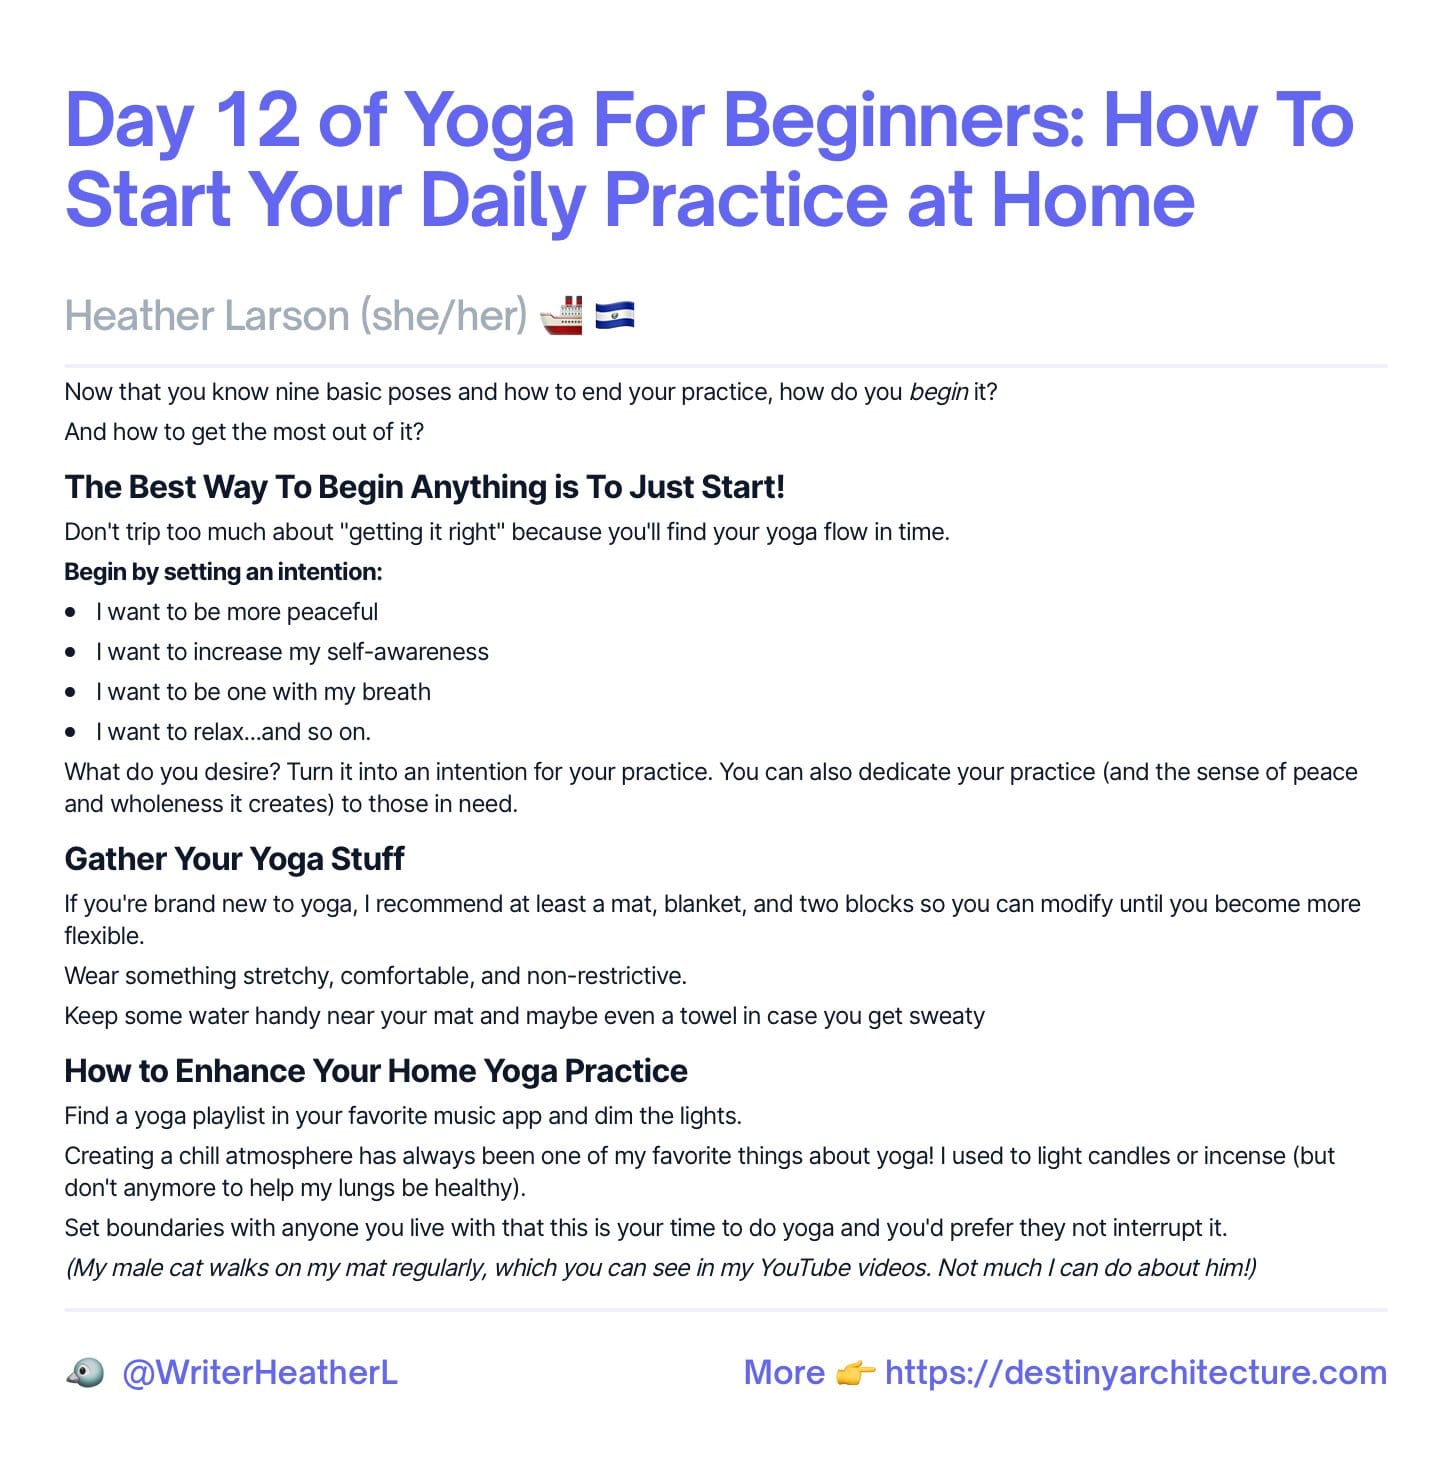 Day 12 of Yoga For Beginners: How To Start Your Daily Practice at Home